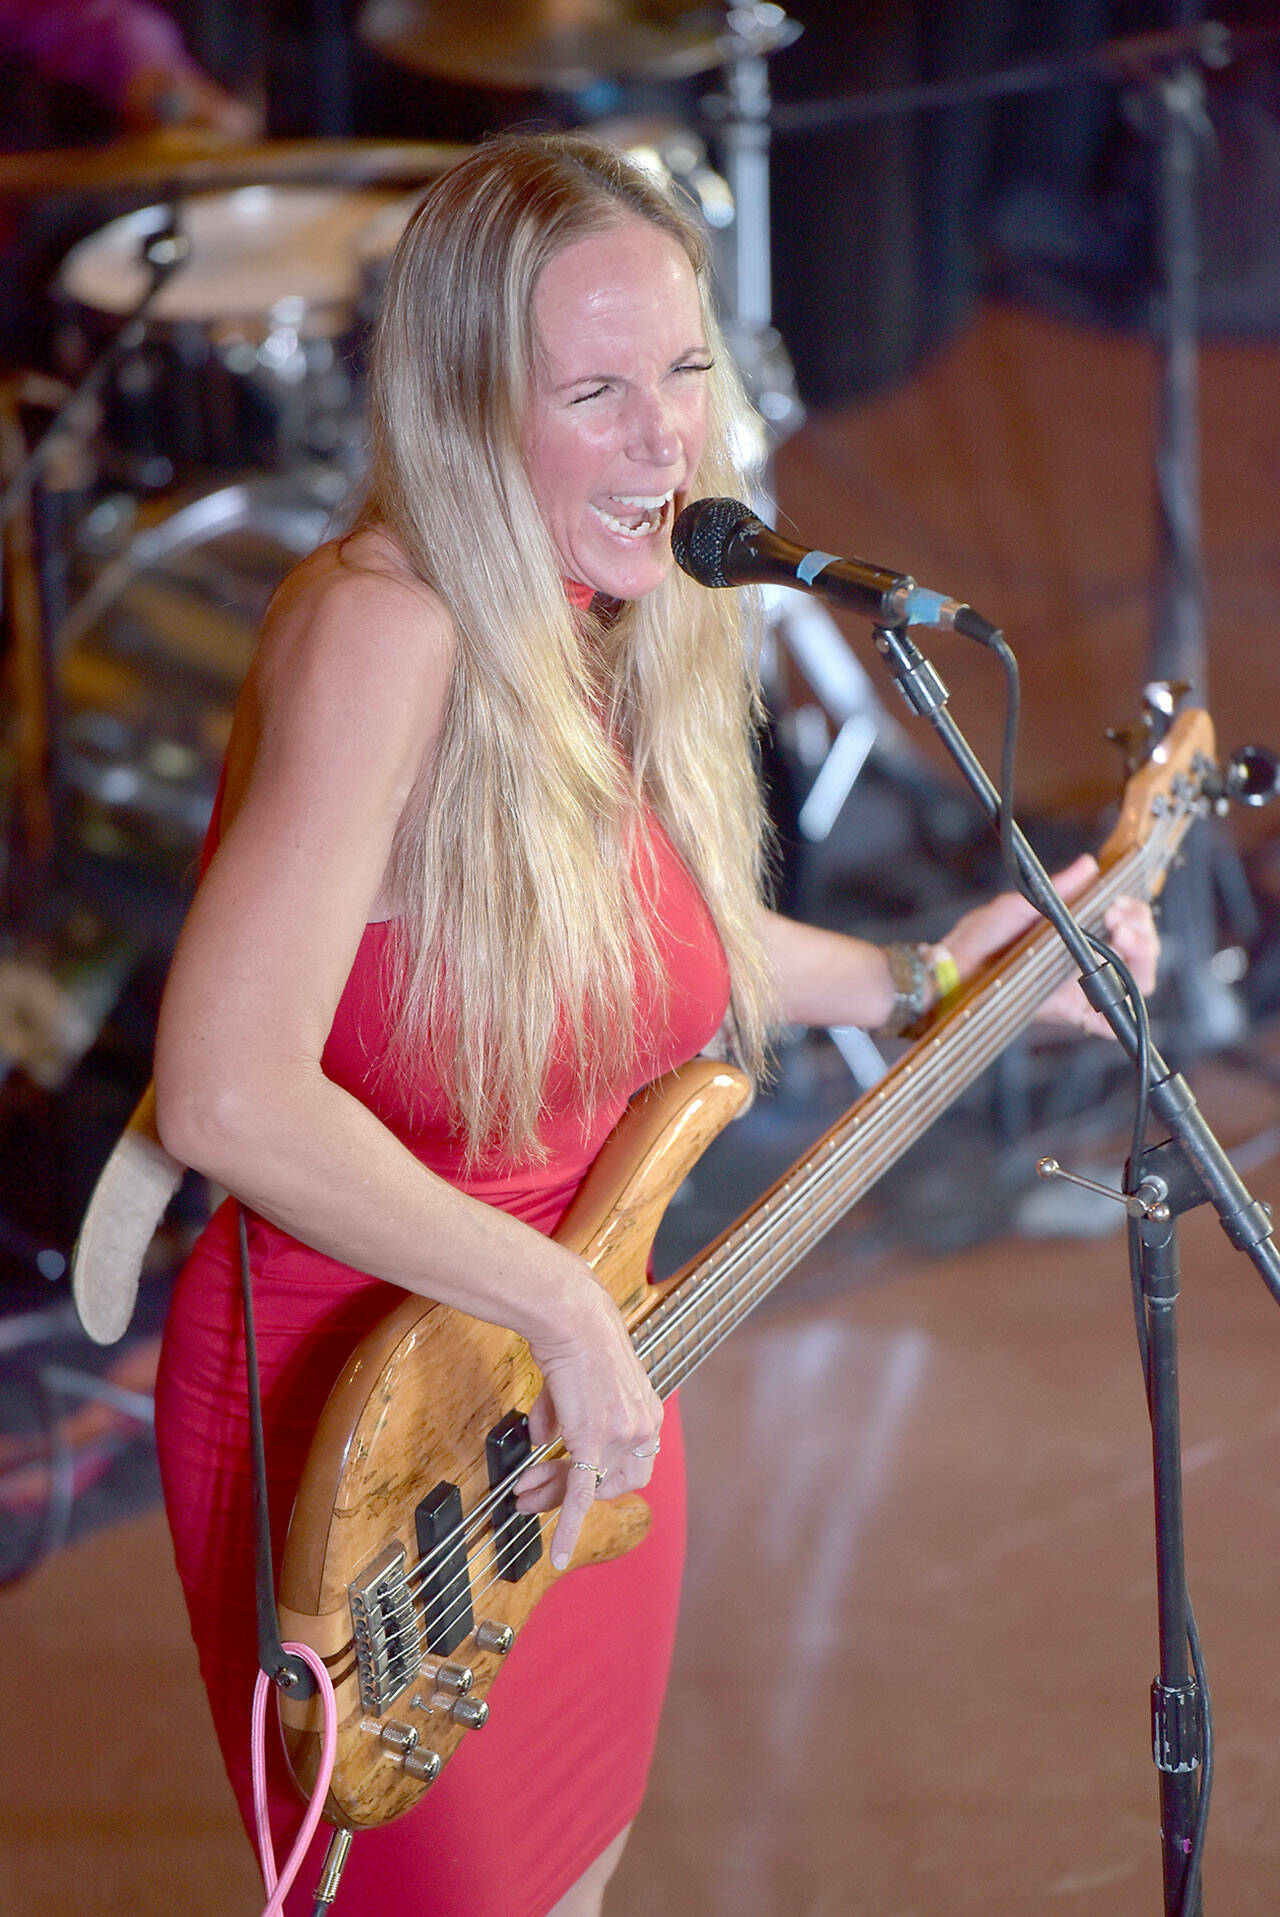 Blues bassist Anni Piper, Australia-born but based in Portland, Ore., takes the stage at the Naval Elks Club in Port Angeles, one of Saturday’s venues of the Juan de Fuca Festival. (Keith Thorpe/Peninsula Daily News)